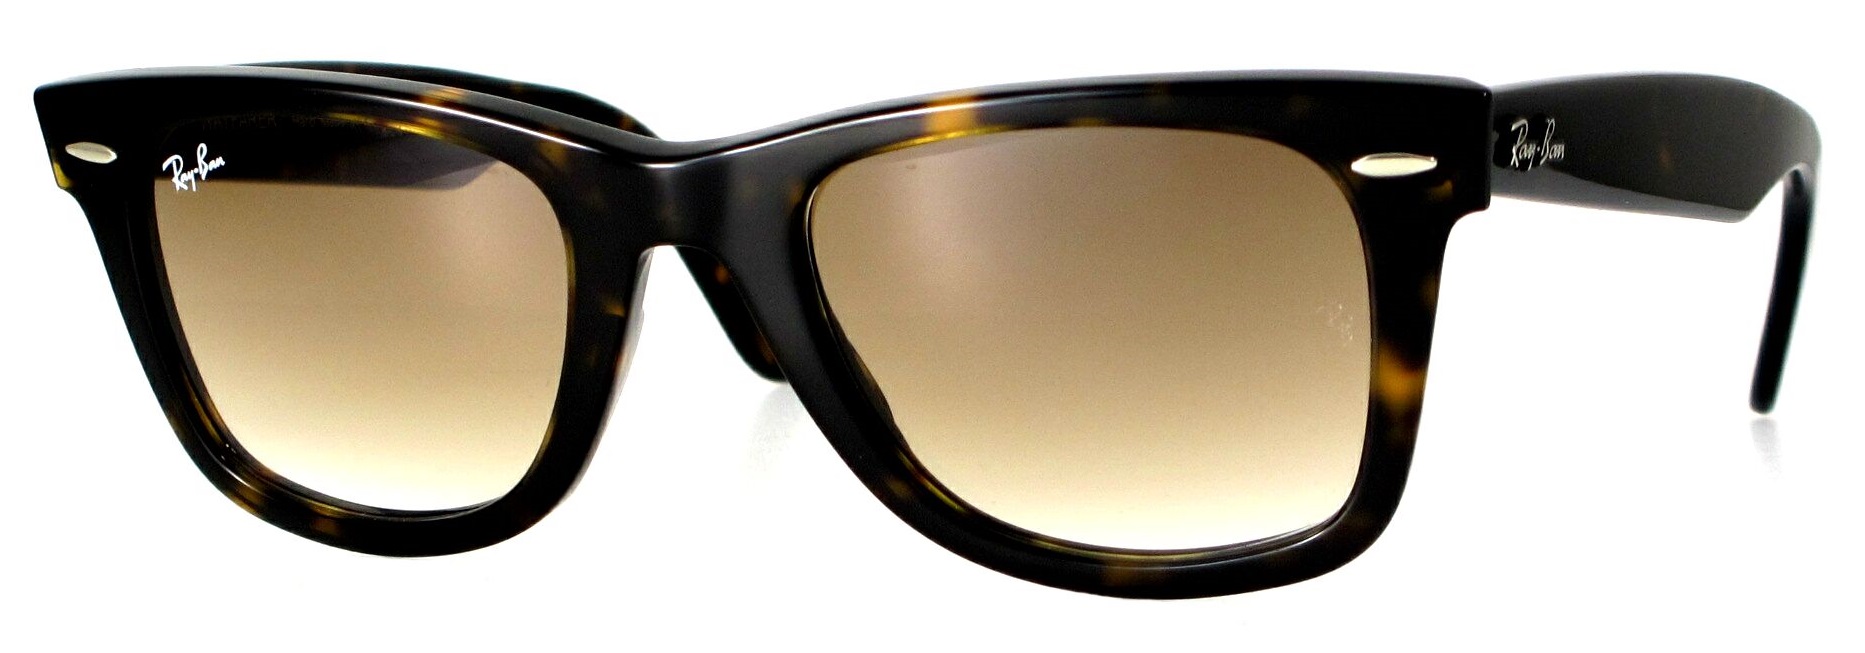 A38 RayBan RB2140-F 902/51